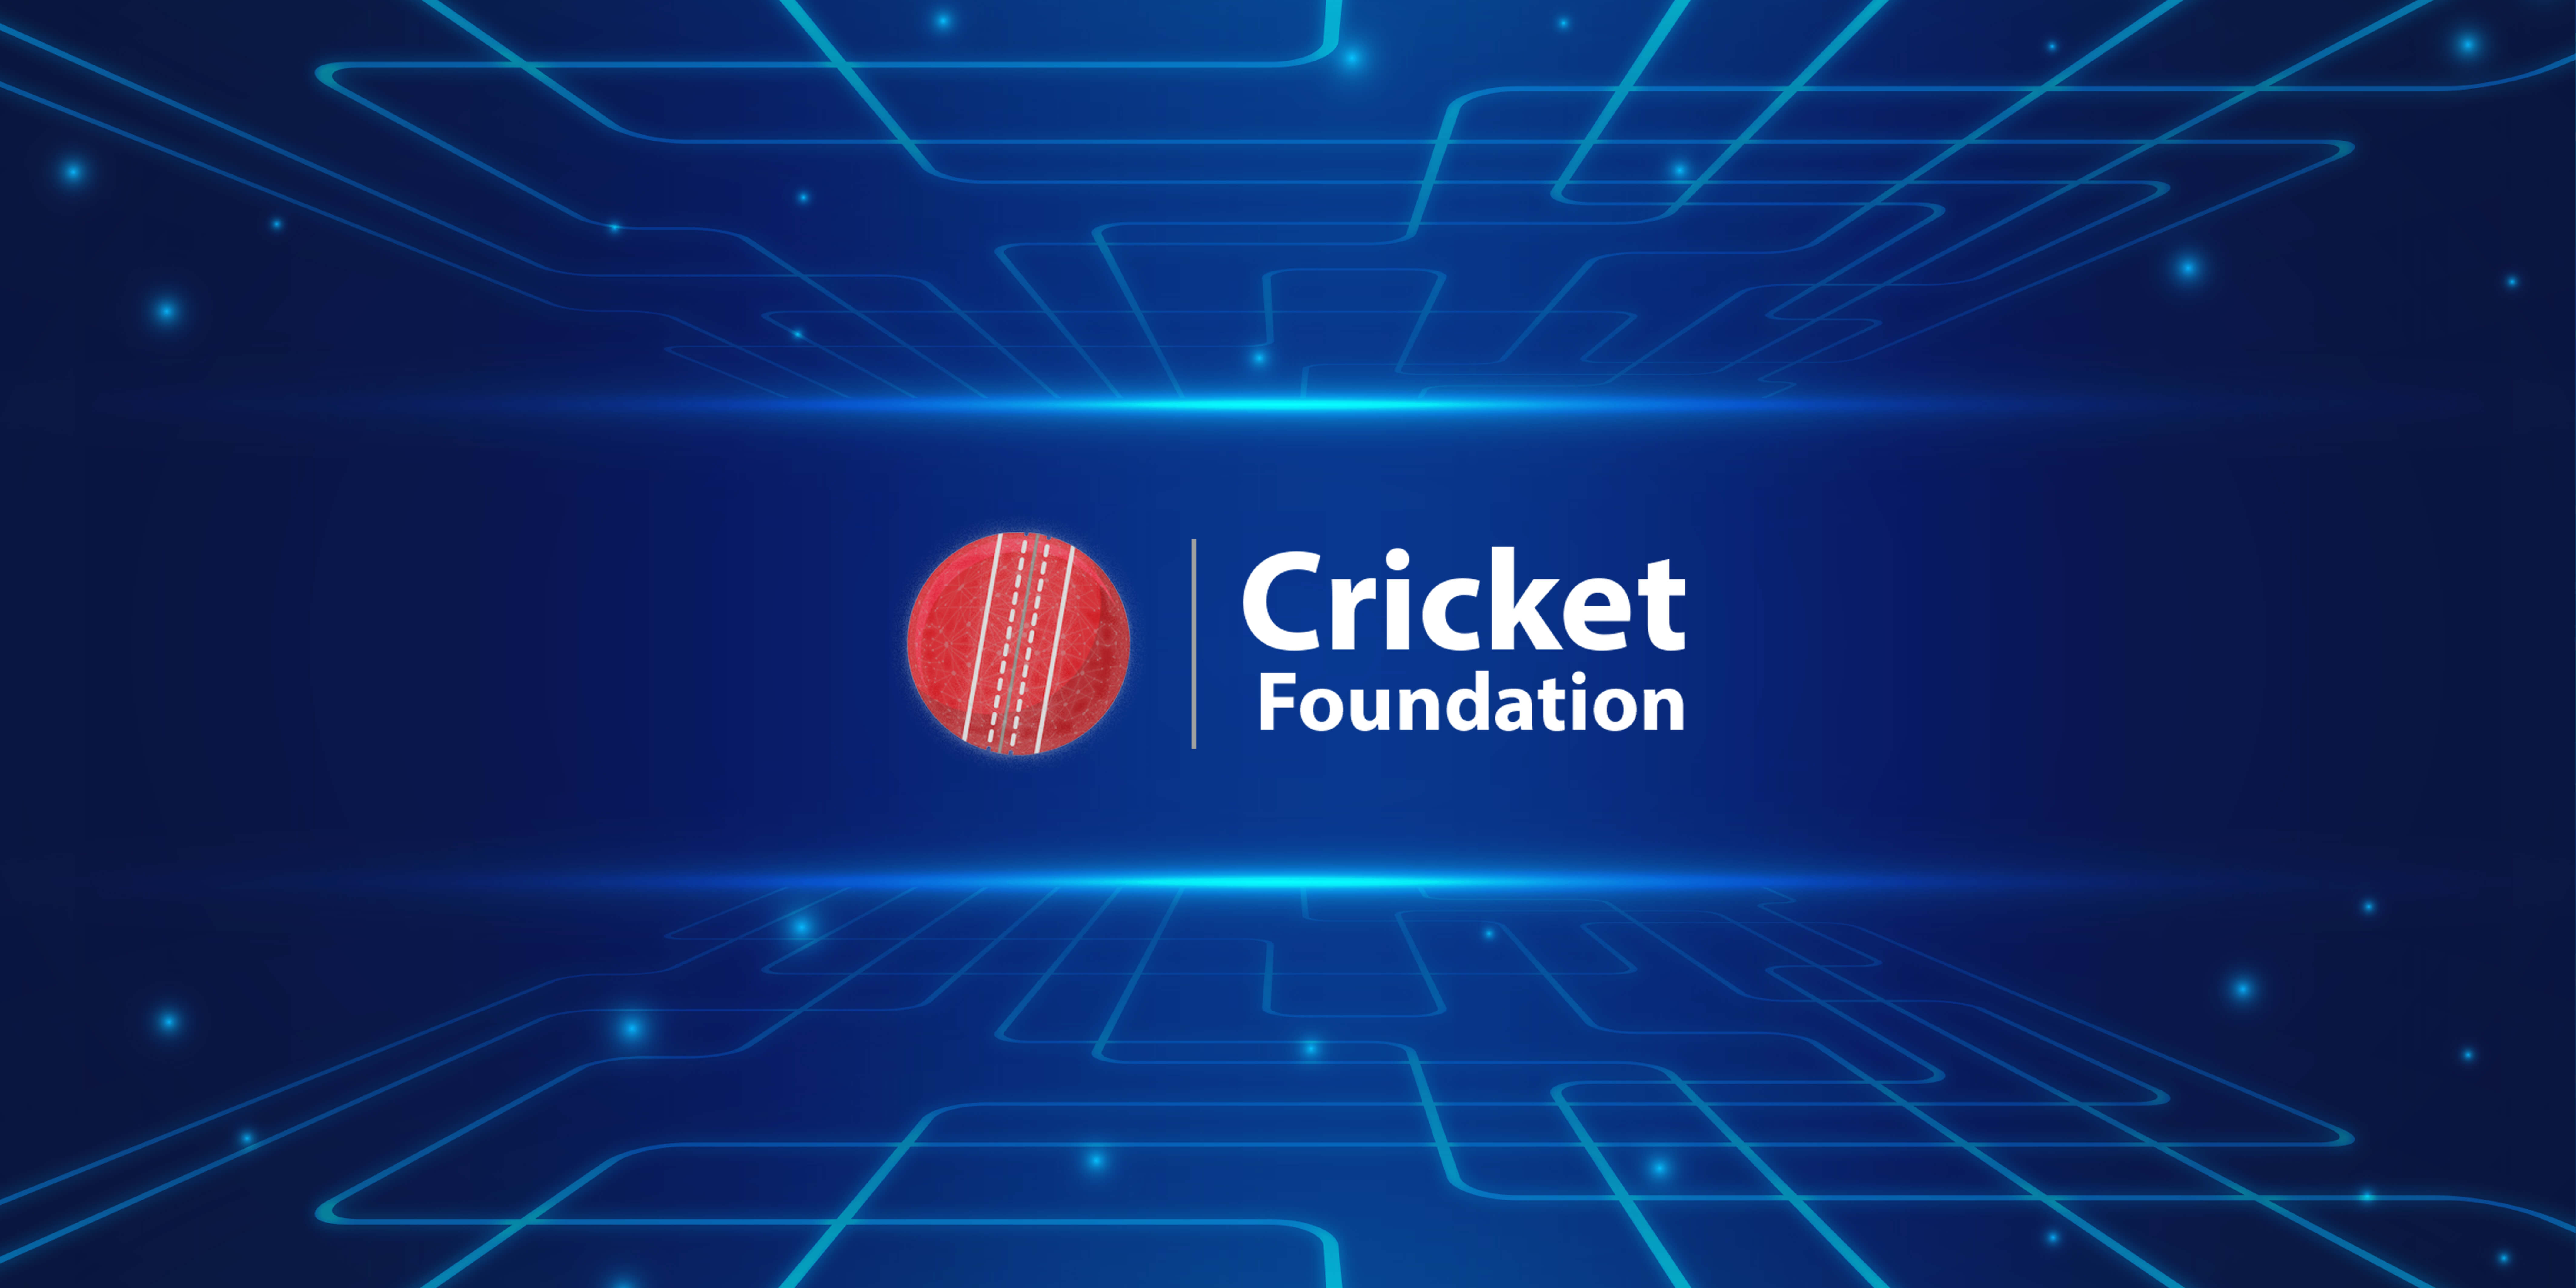 How does Cricket Foundation bring the power of blockchain to cricket